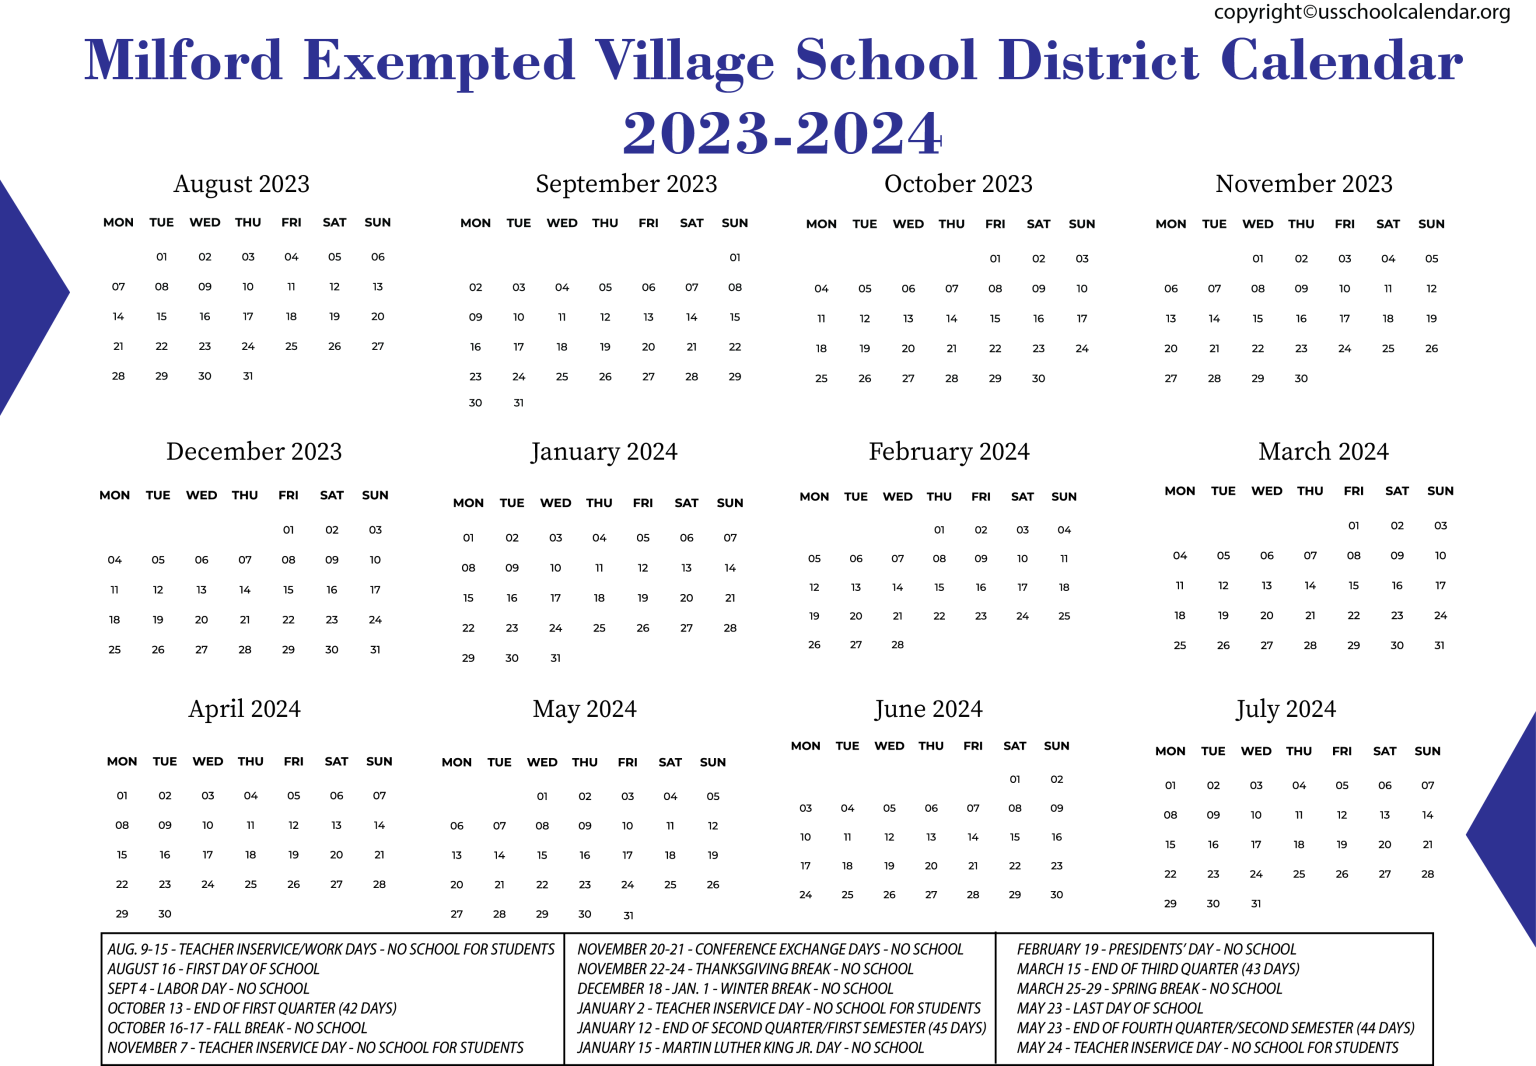 Milford Exempted Village School District Calendar for 20232024